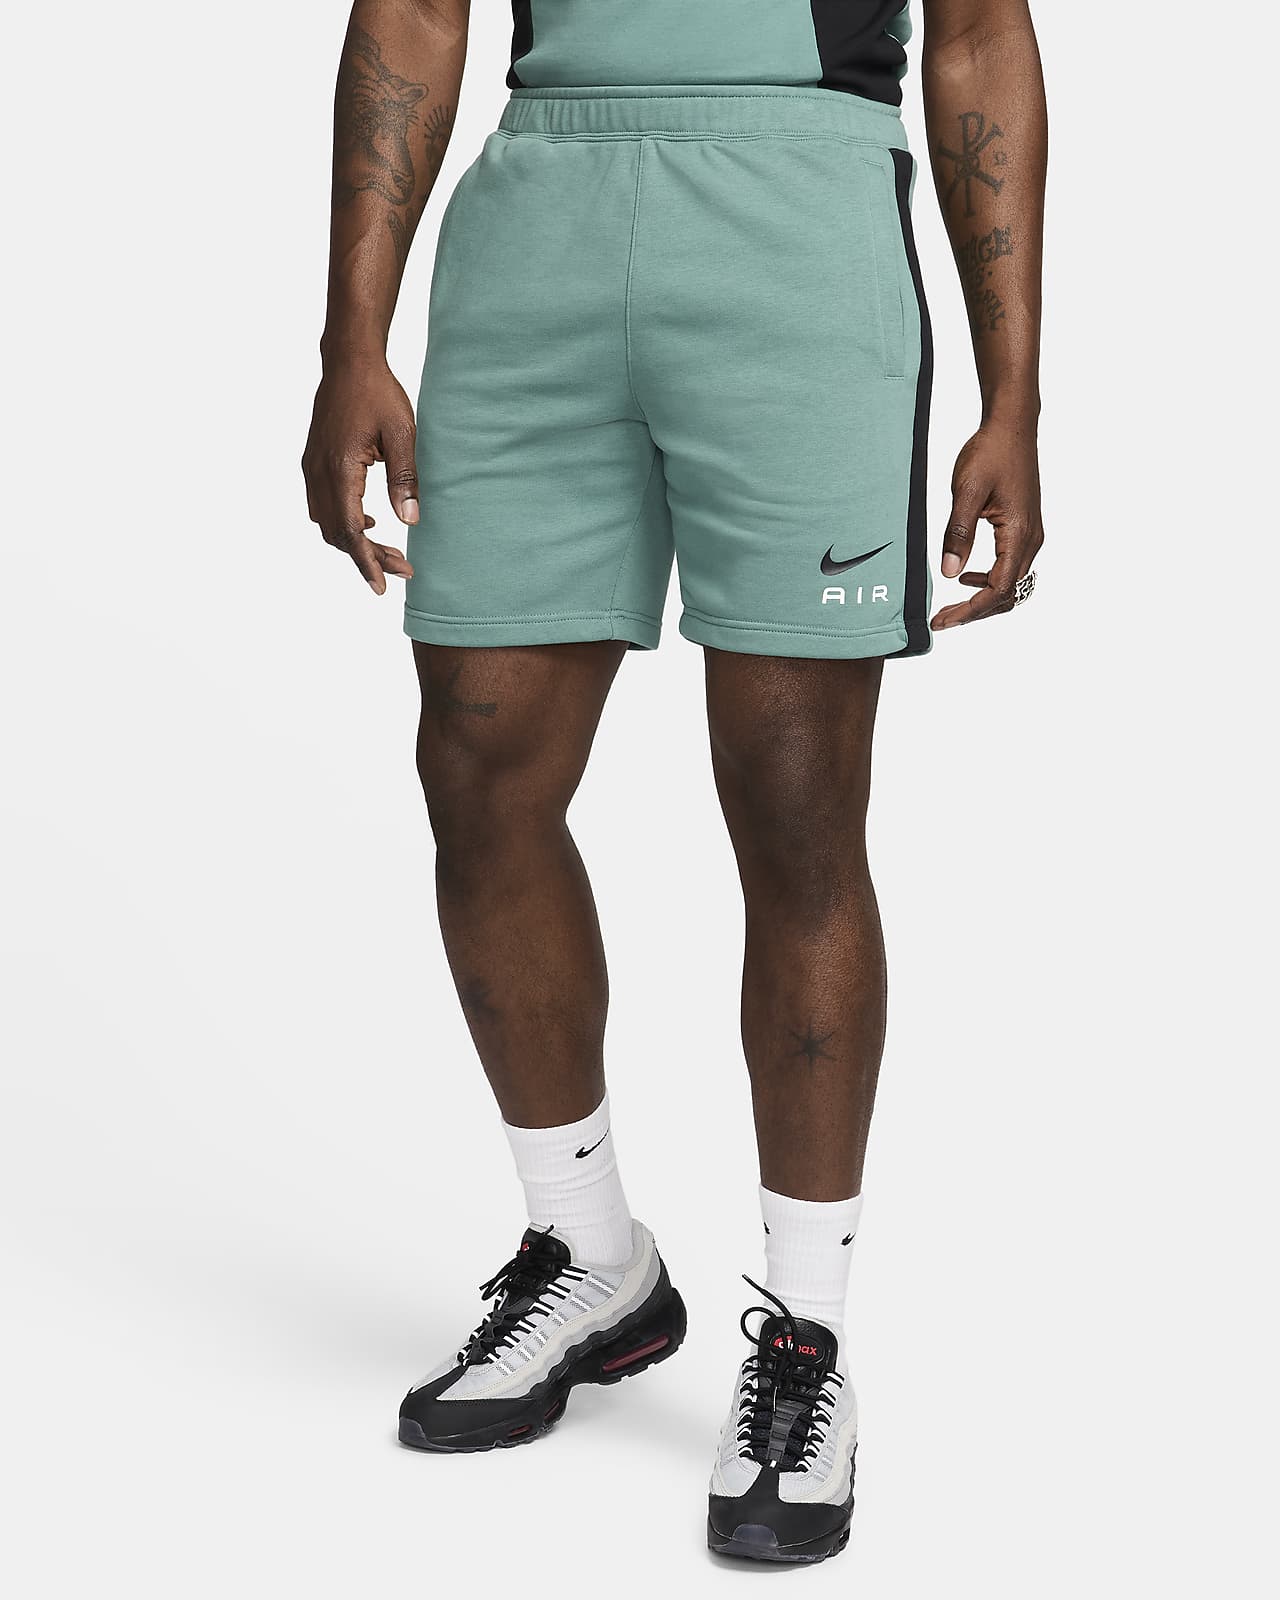 Nike Air Pantalons curts de teixit French Terry - Home